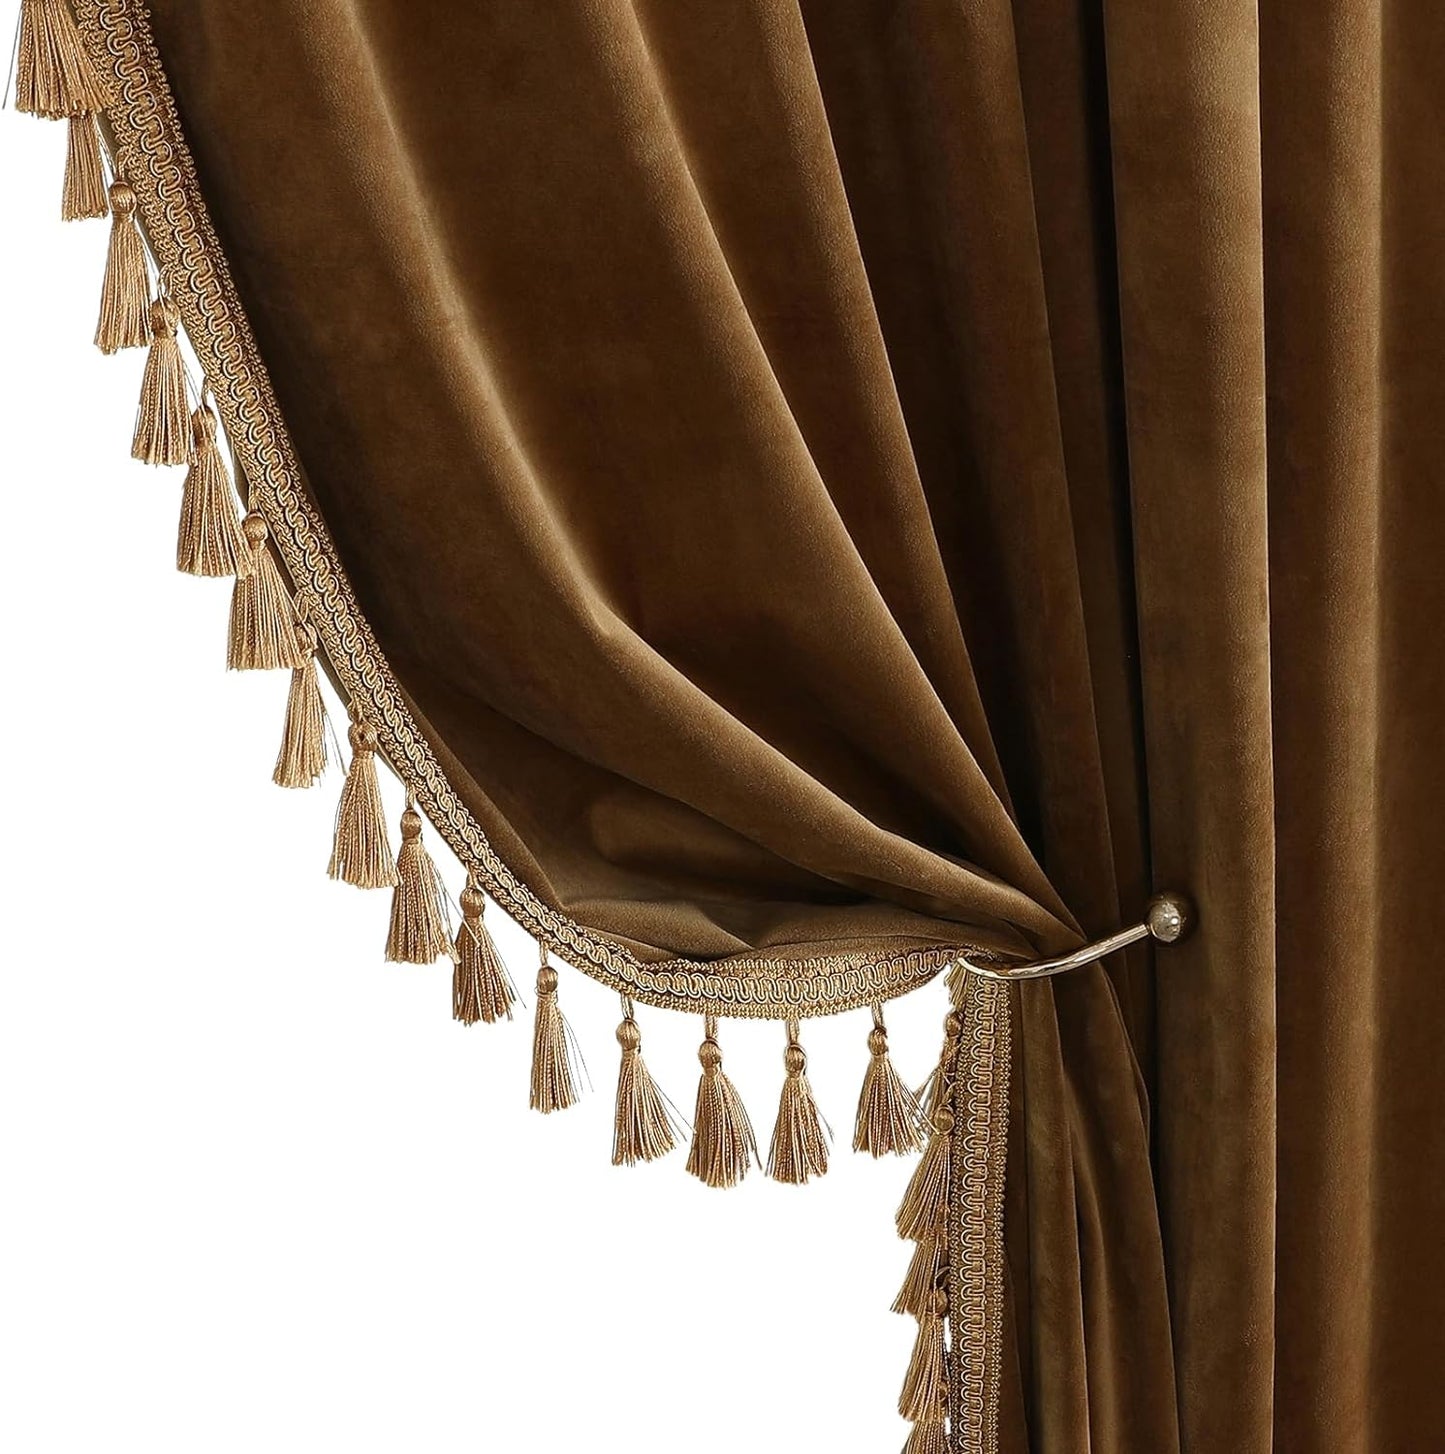 Benedeco Green Velvet Curtains for Bedroom Window, Super Soft Luxury Drapes, Room Darkening Thermal Insulated Rod Pocket Curtain for Living Room, W52 by L84 Inches, 2 Panels  Benedeco Goldbrown-Boho Tassel W52 * L84 | 2 Panels 